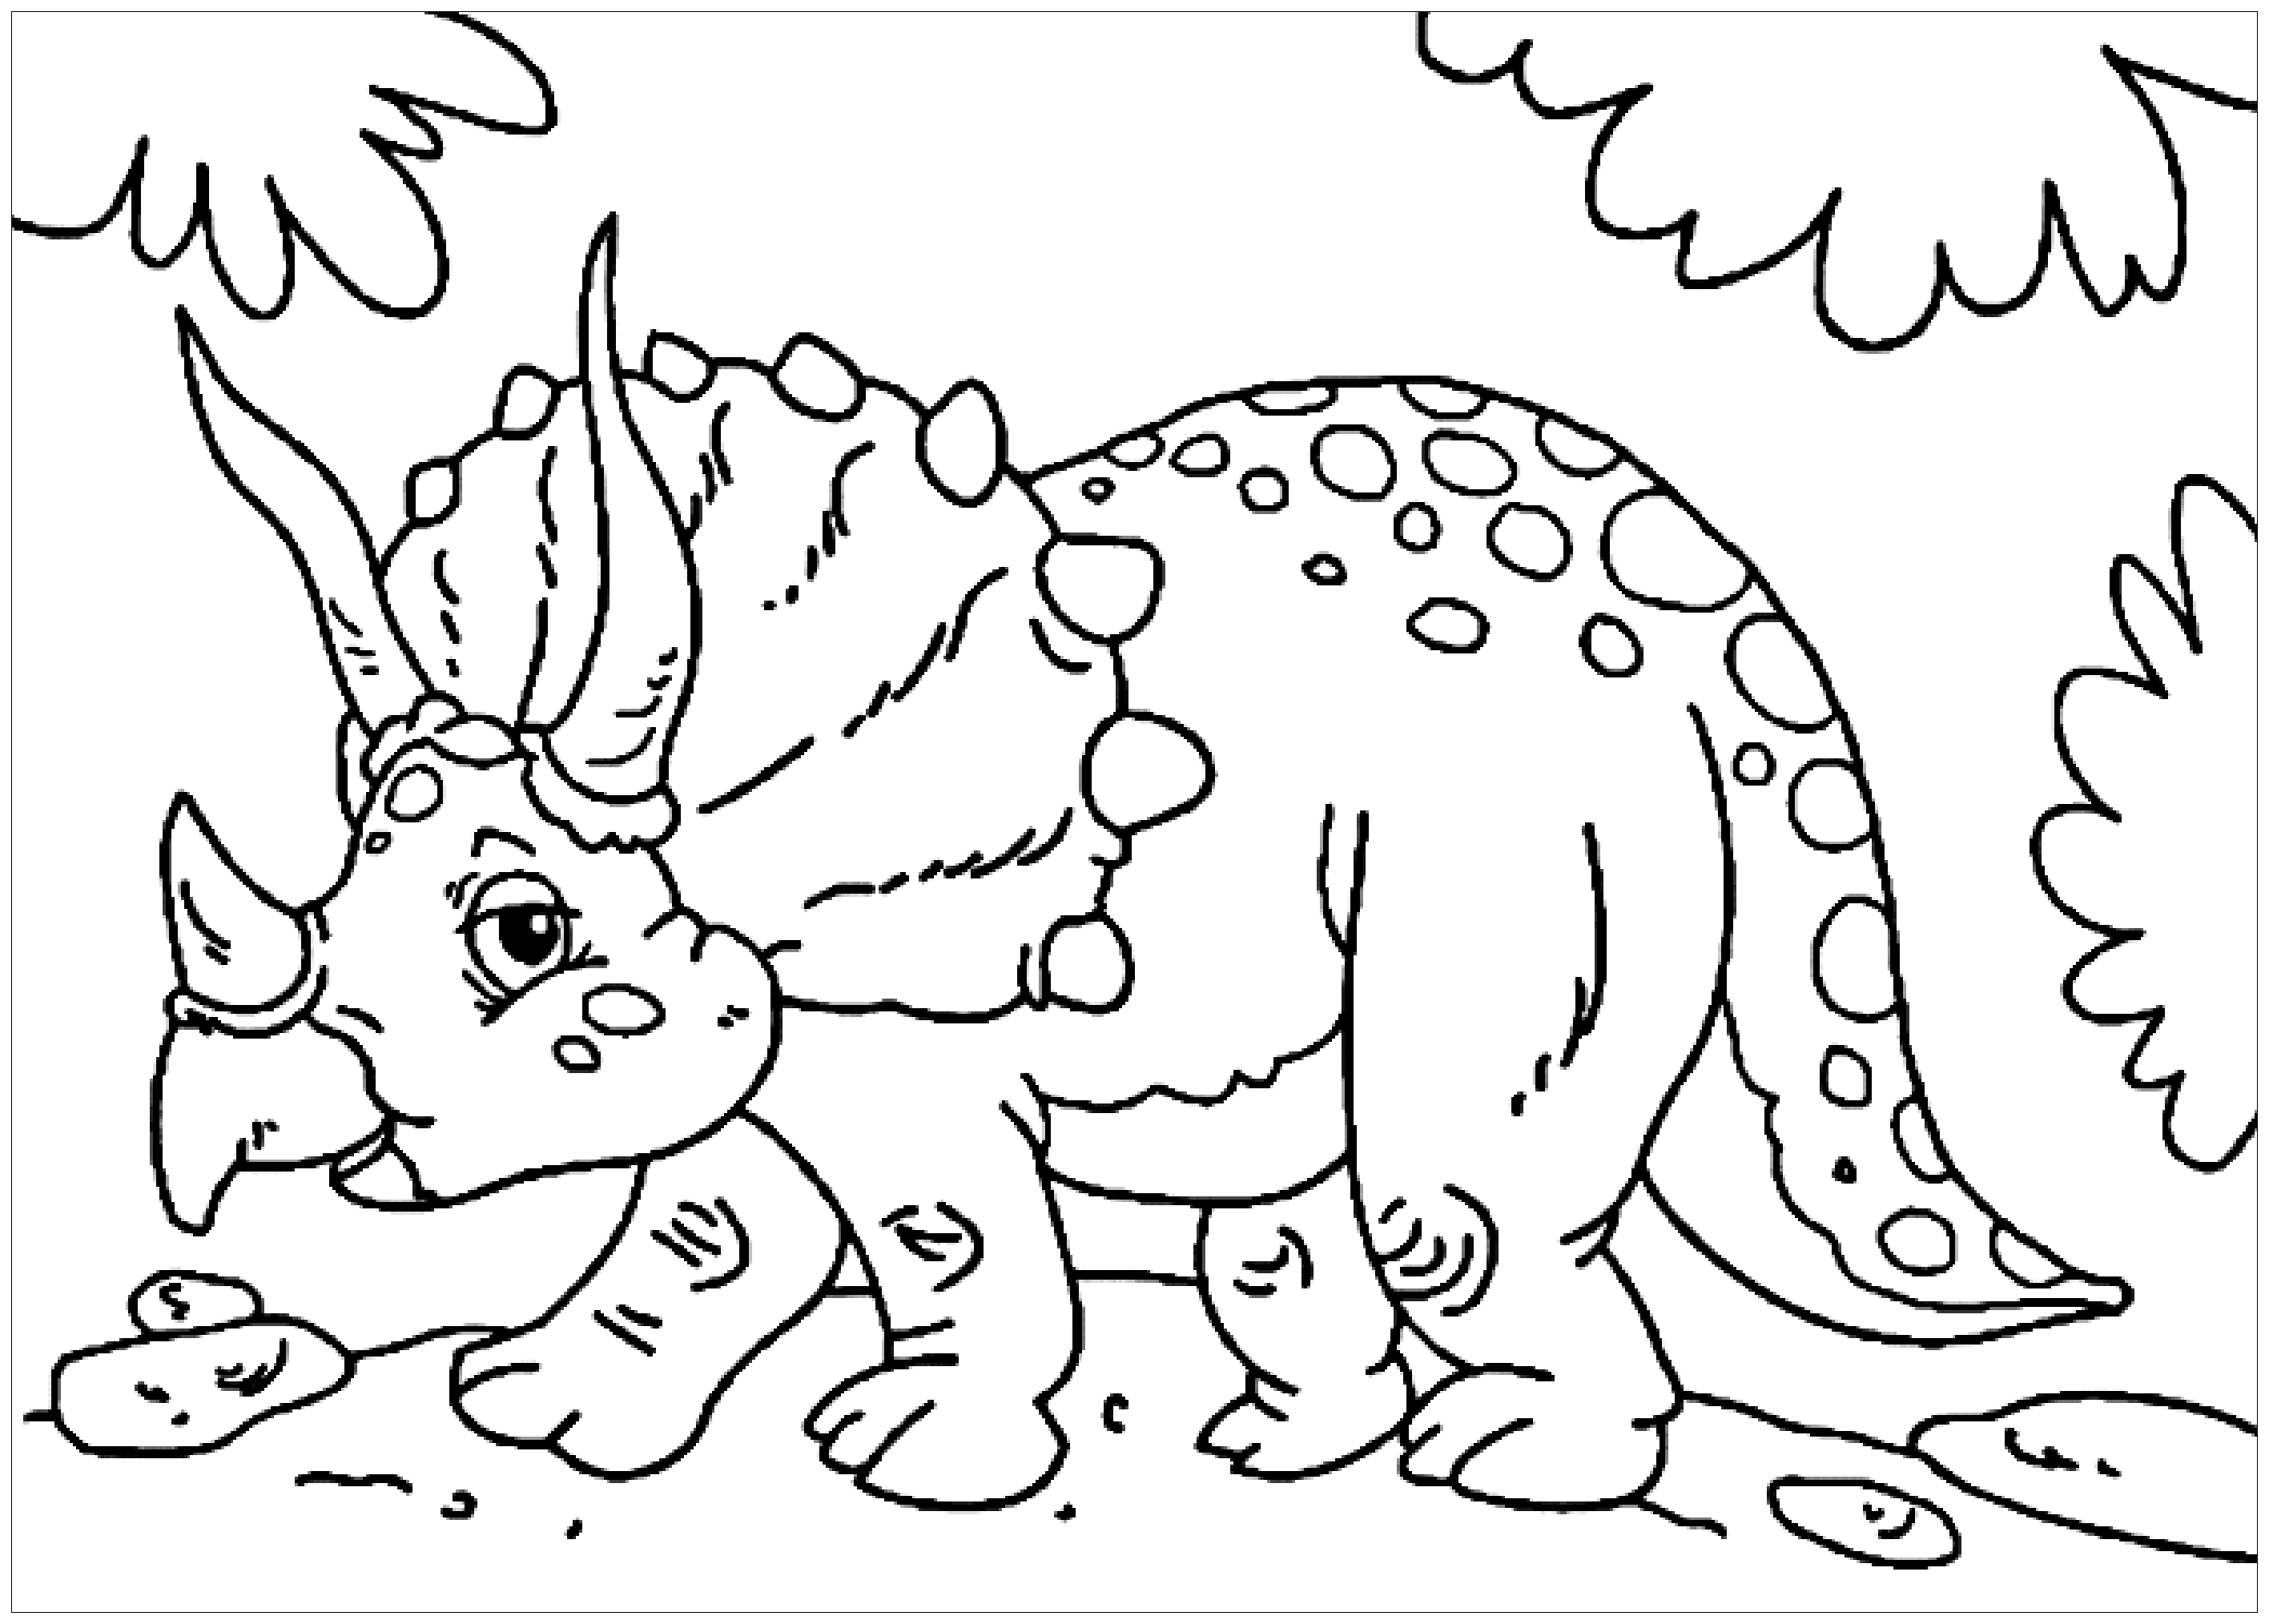 triceratops-walking-dinosaurs-kids-coloring-pages